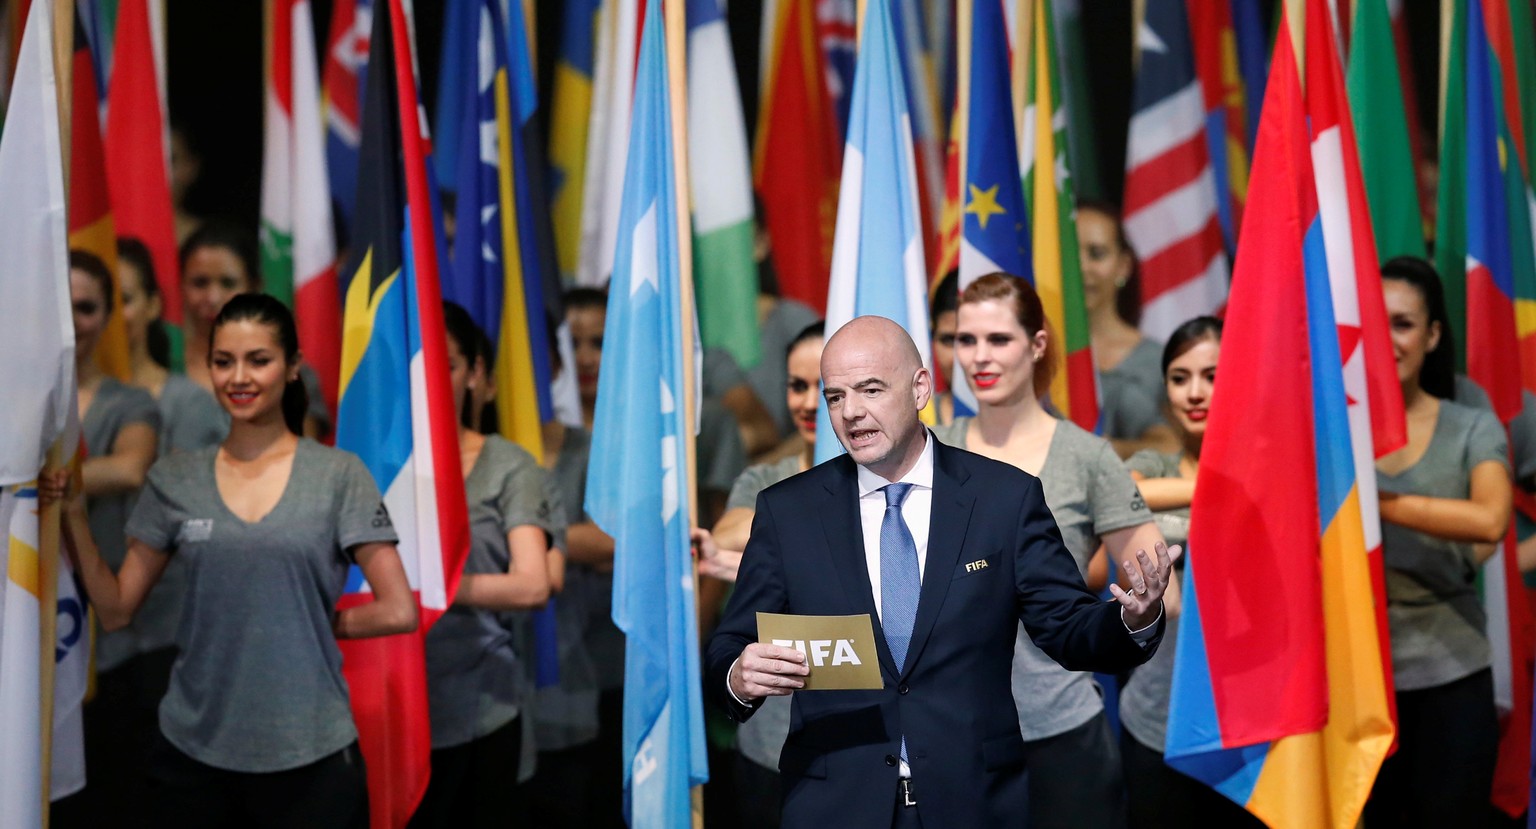 FIFA President Gianni Infantino makes his speech during the opening ceremony of the 66th FIFA Congress in Mexico City, Mexico, May 12, 2016. REUTERS/Edgard Garrido